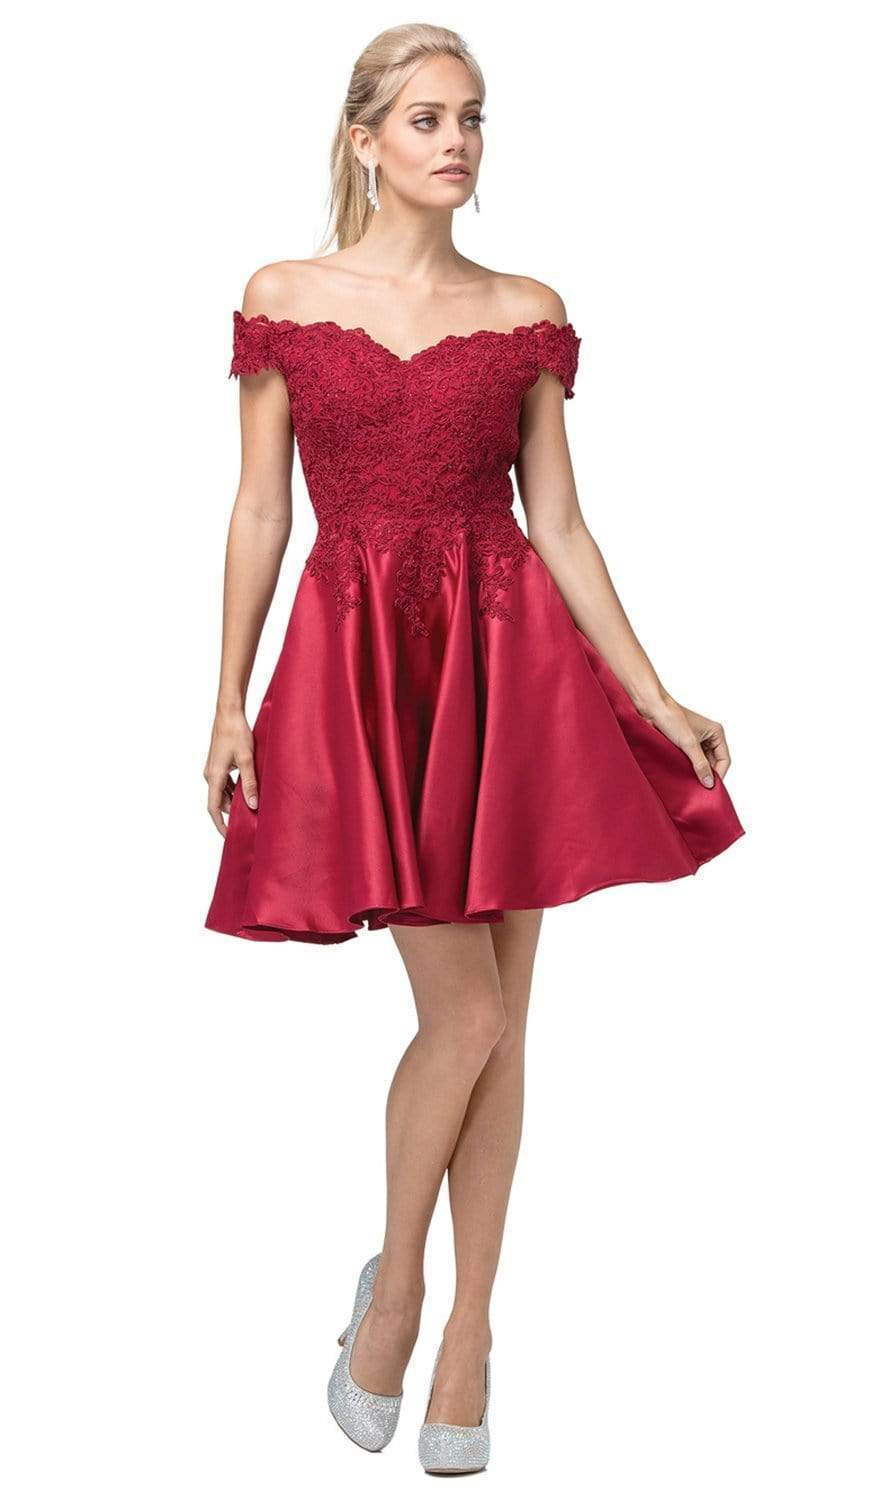 Dancing Queen - 3213 Off Shoulder Lace and Satin Cocktail Dress